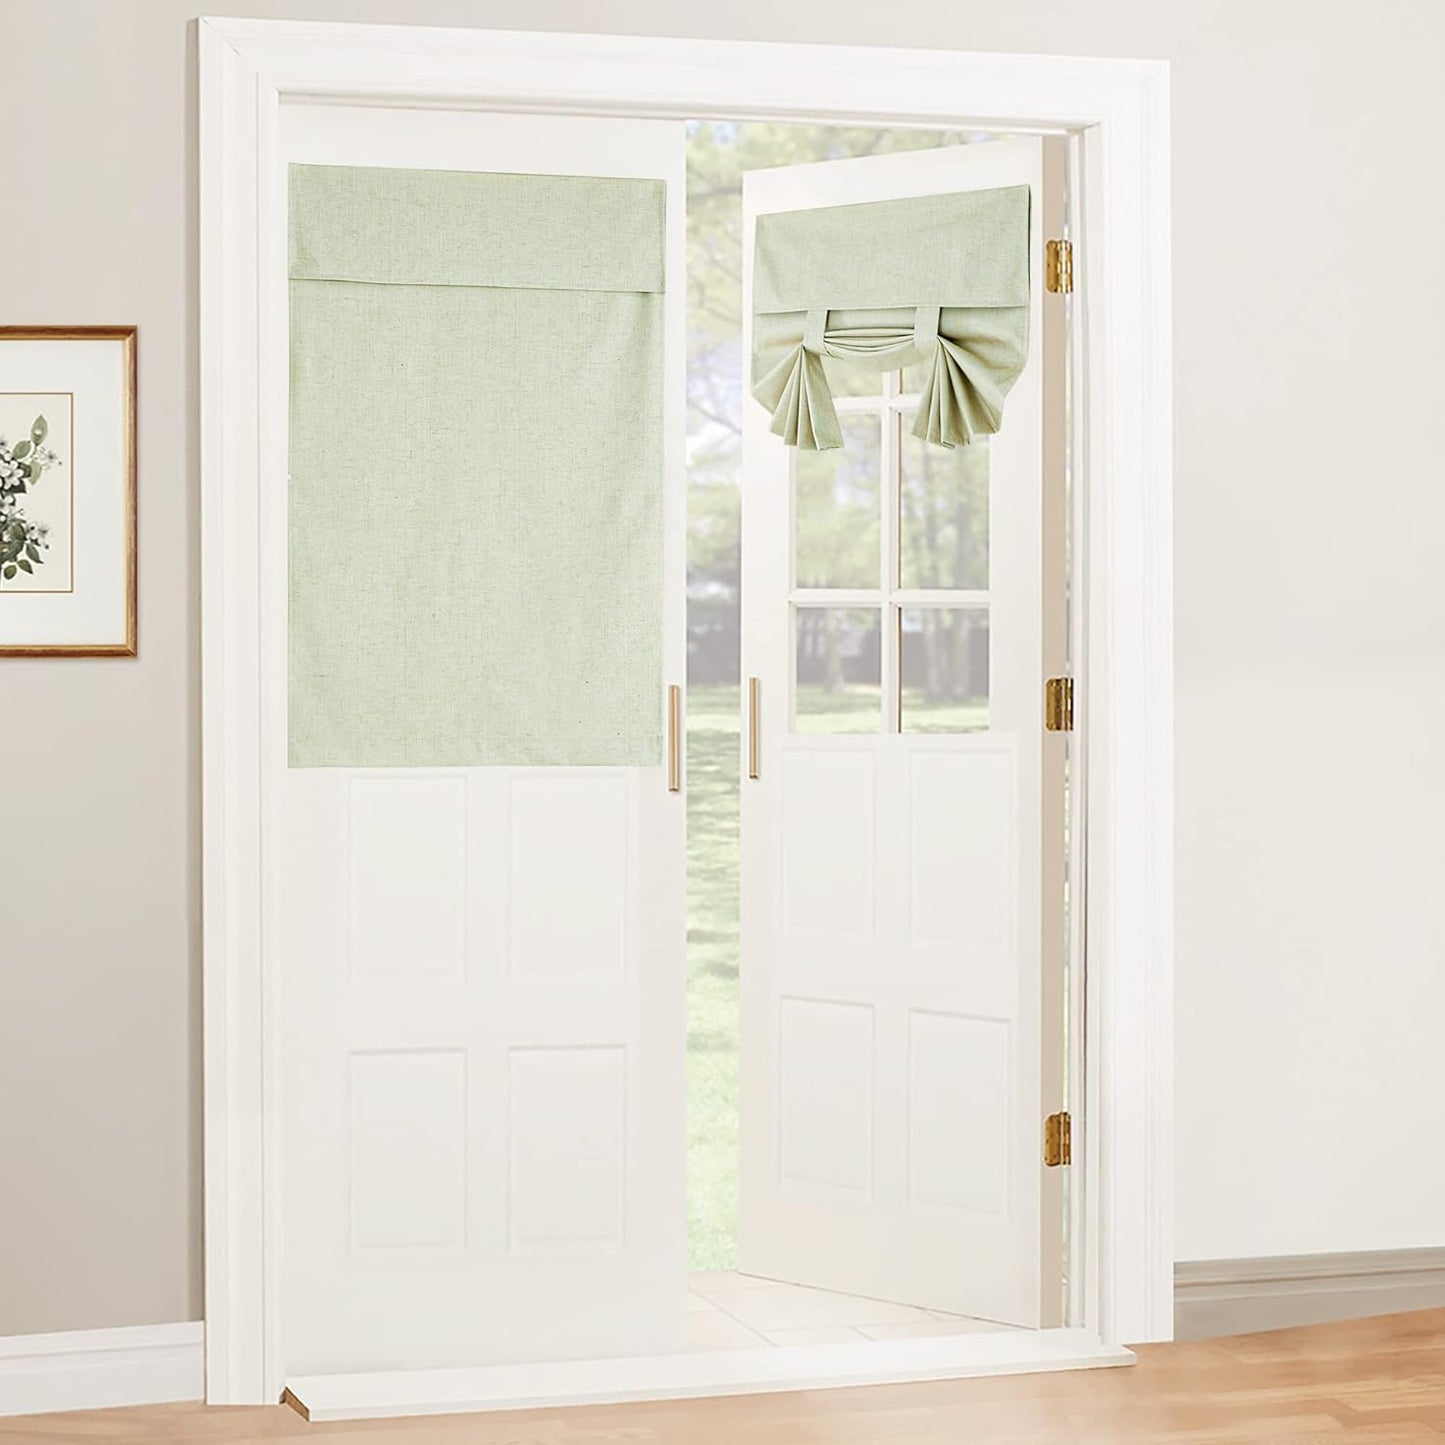 RYB HOME Blackout French Door Curtains, Room Darkening Shades Small Door Window Curtains and Drapes Thermal Insulated Tricia Door Blinds for Patio Door Doorway, W26 X L40 Inch, 1 Panel, Gray  RYB HOME Sage Green 30" X 40" 